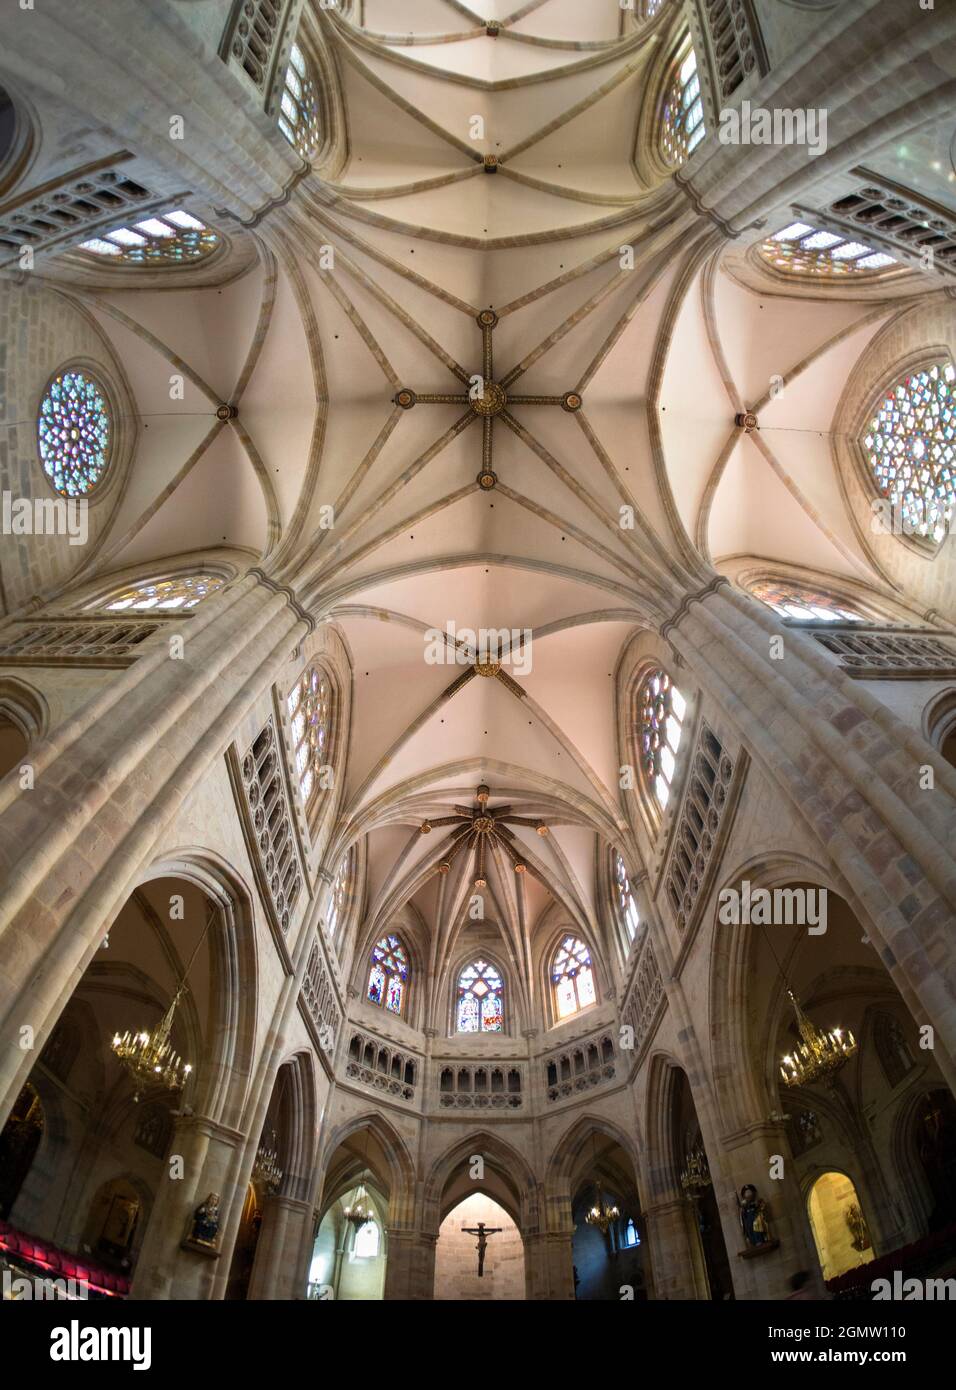 Fisheye view of the magnificent interior of Bilbao Cathedral, Spain.  Consecrated in honour of the apostle Saint James the Great, the Roman Catholic S Stock Photo